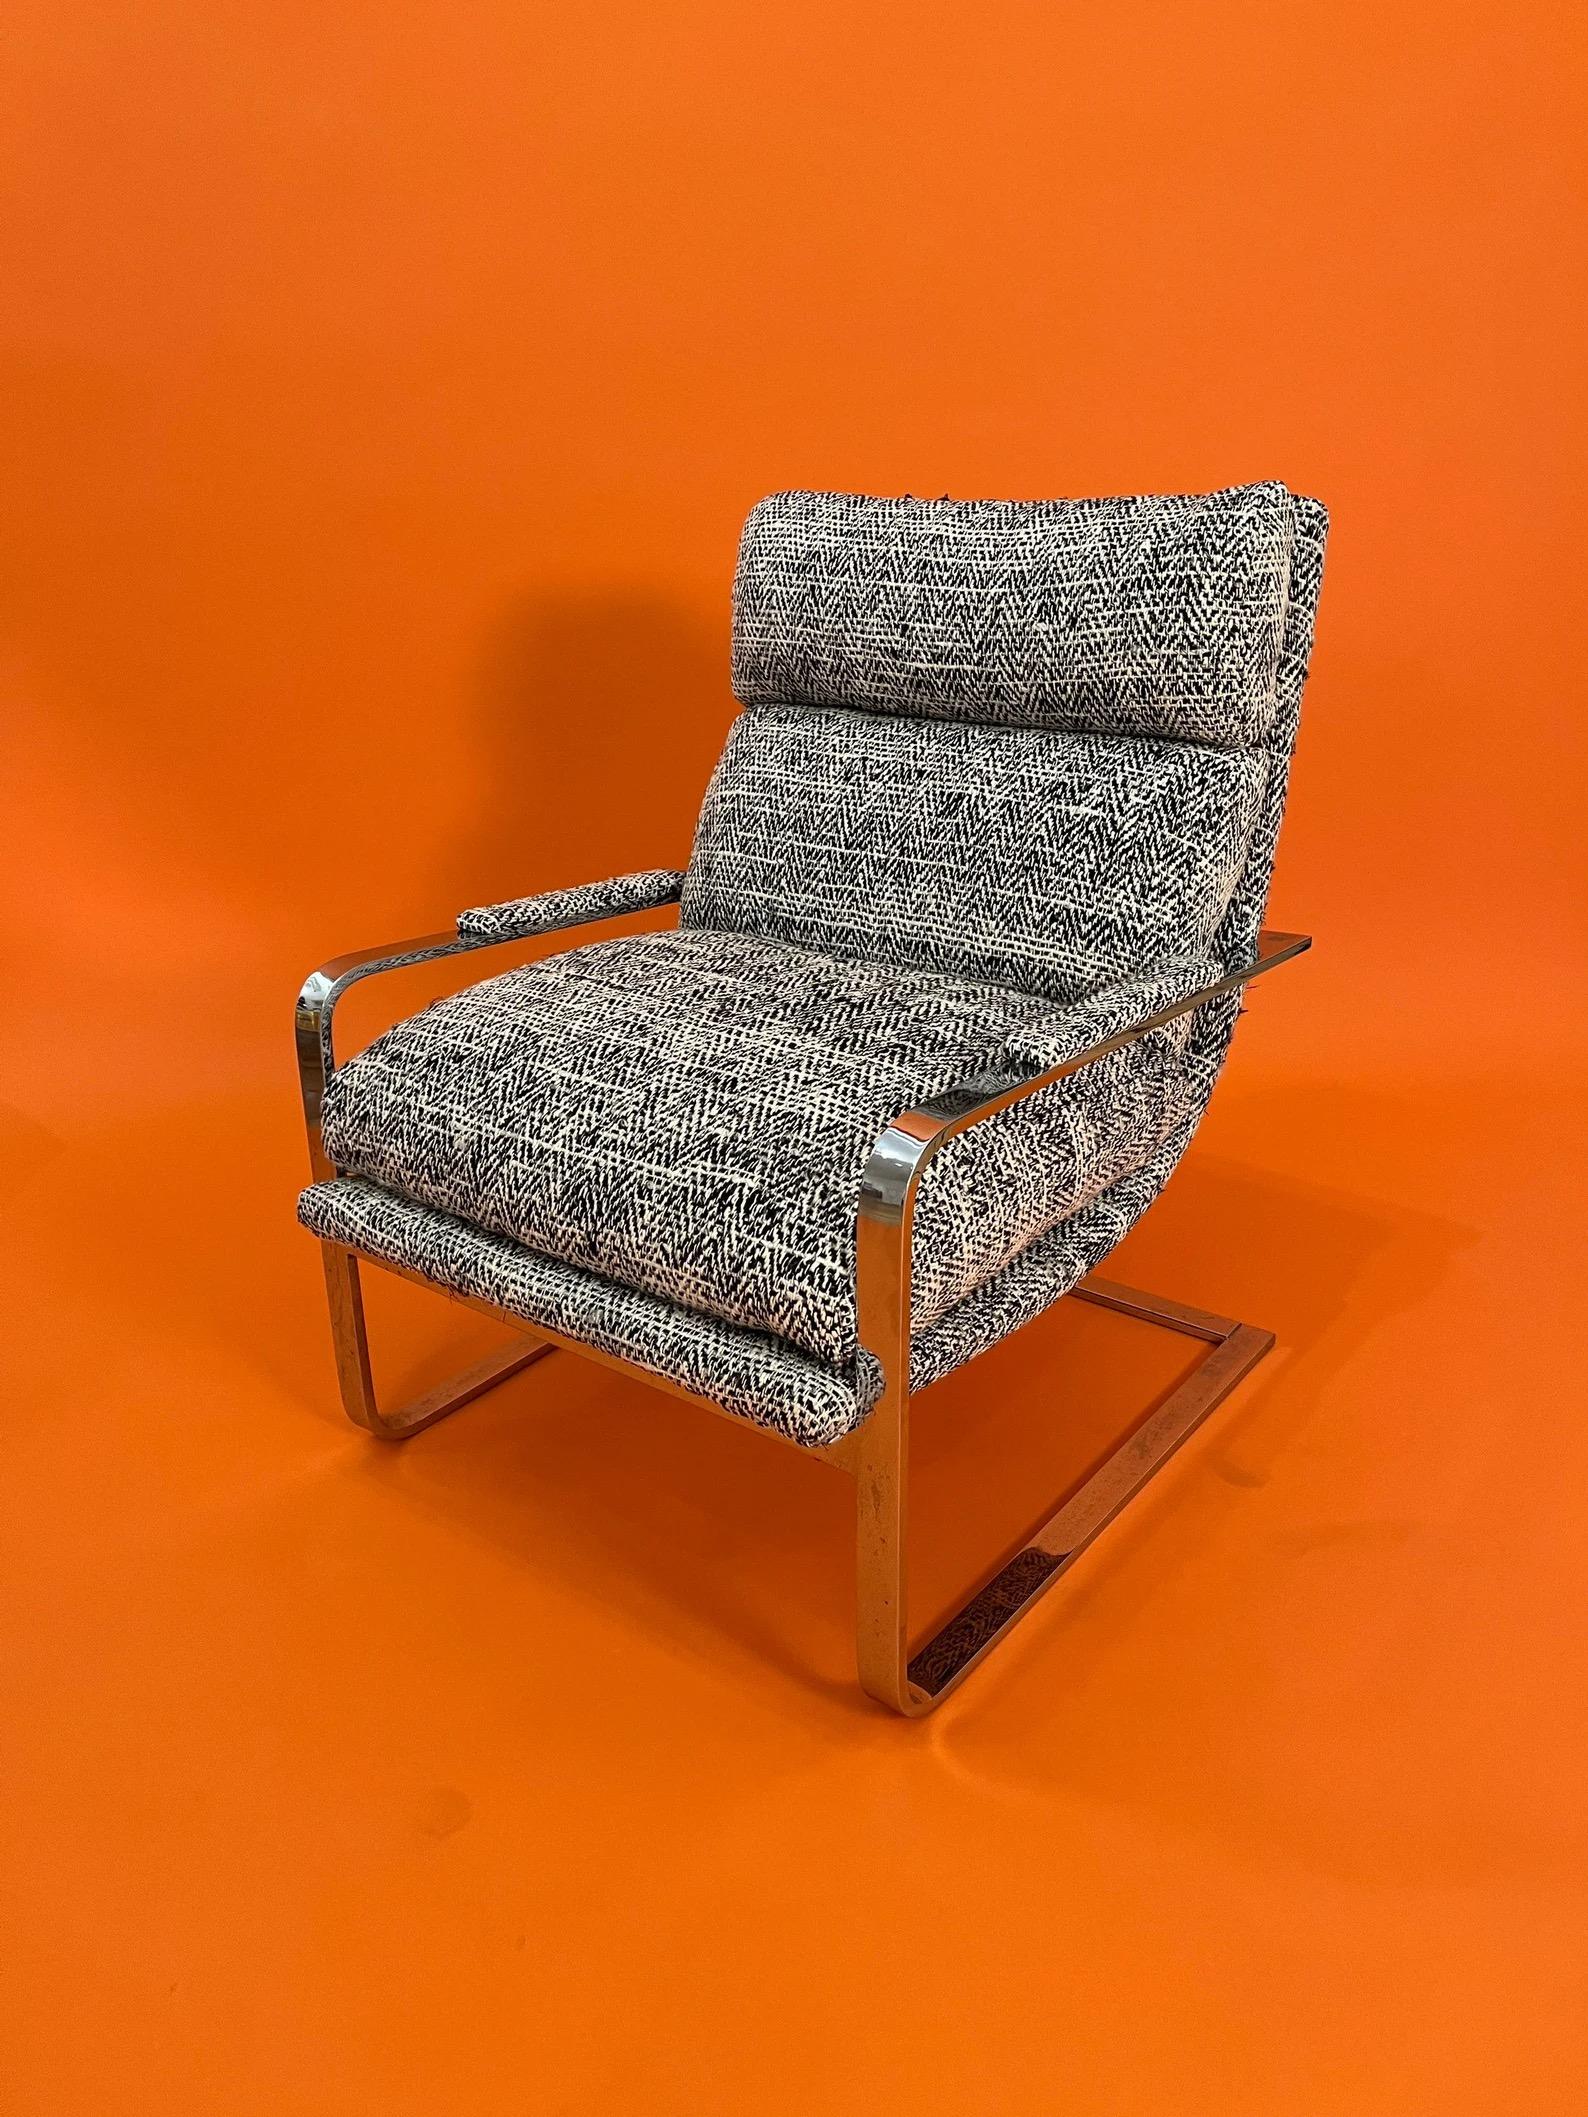 Curated, midcentury Heavy chrome lounge chair with new black & White tweeted Upholstery 1960s. Milo Baughman style 1970s circa 

Dimensions: 
Arm to Arm: 26 inches 
Interior deep: 19 inches
High-back: 33 inches 
Exterior Depth: 27 inches
Seat